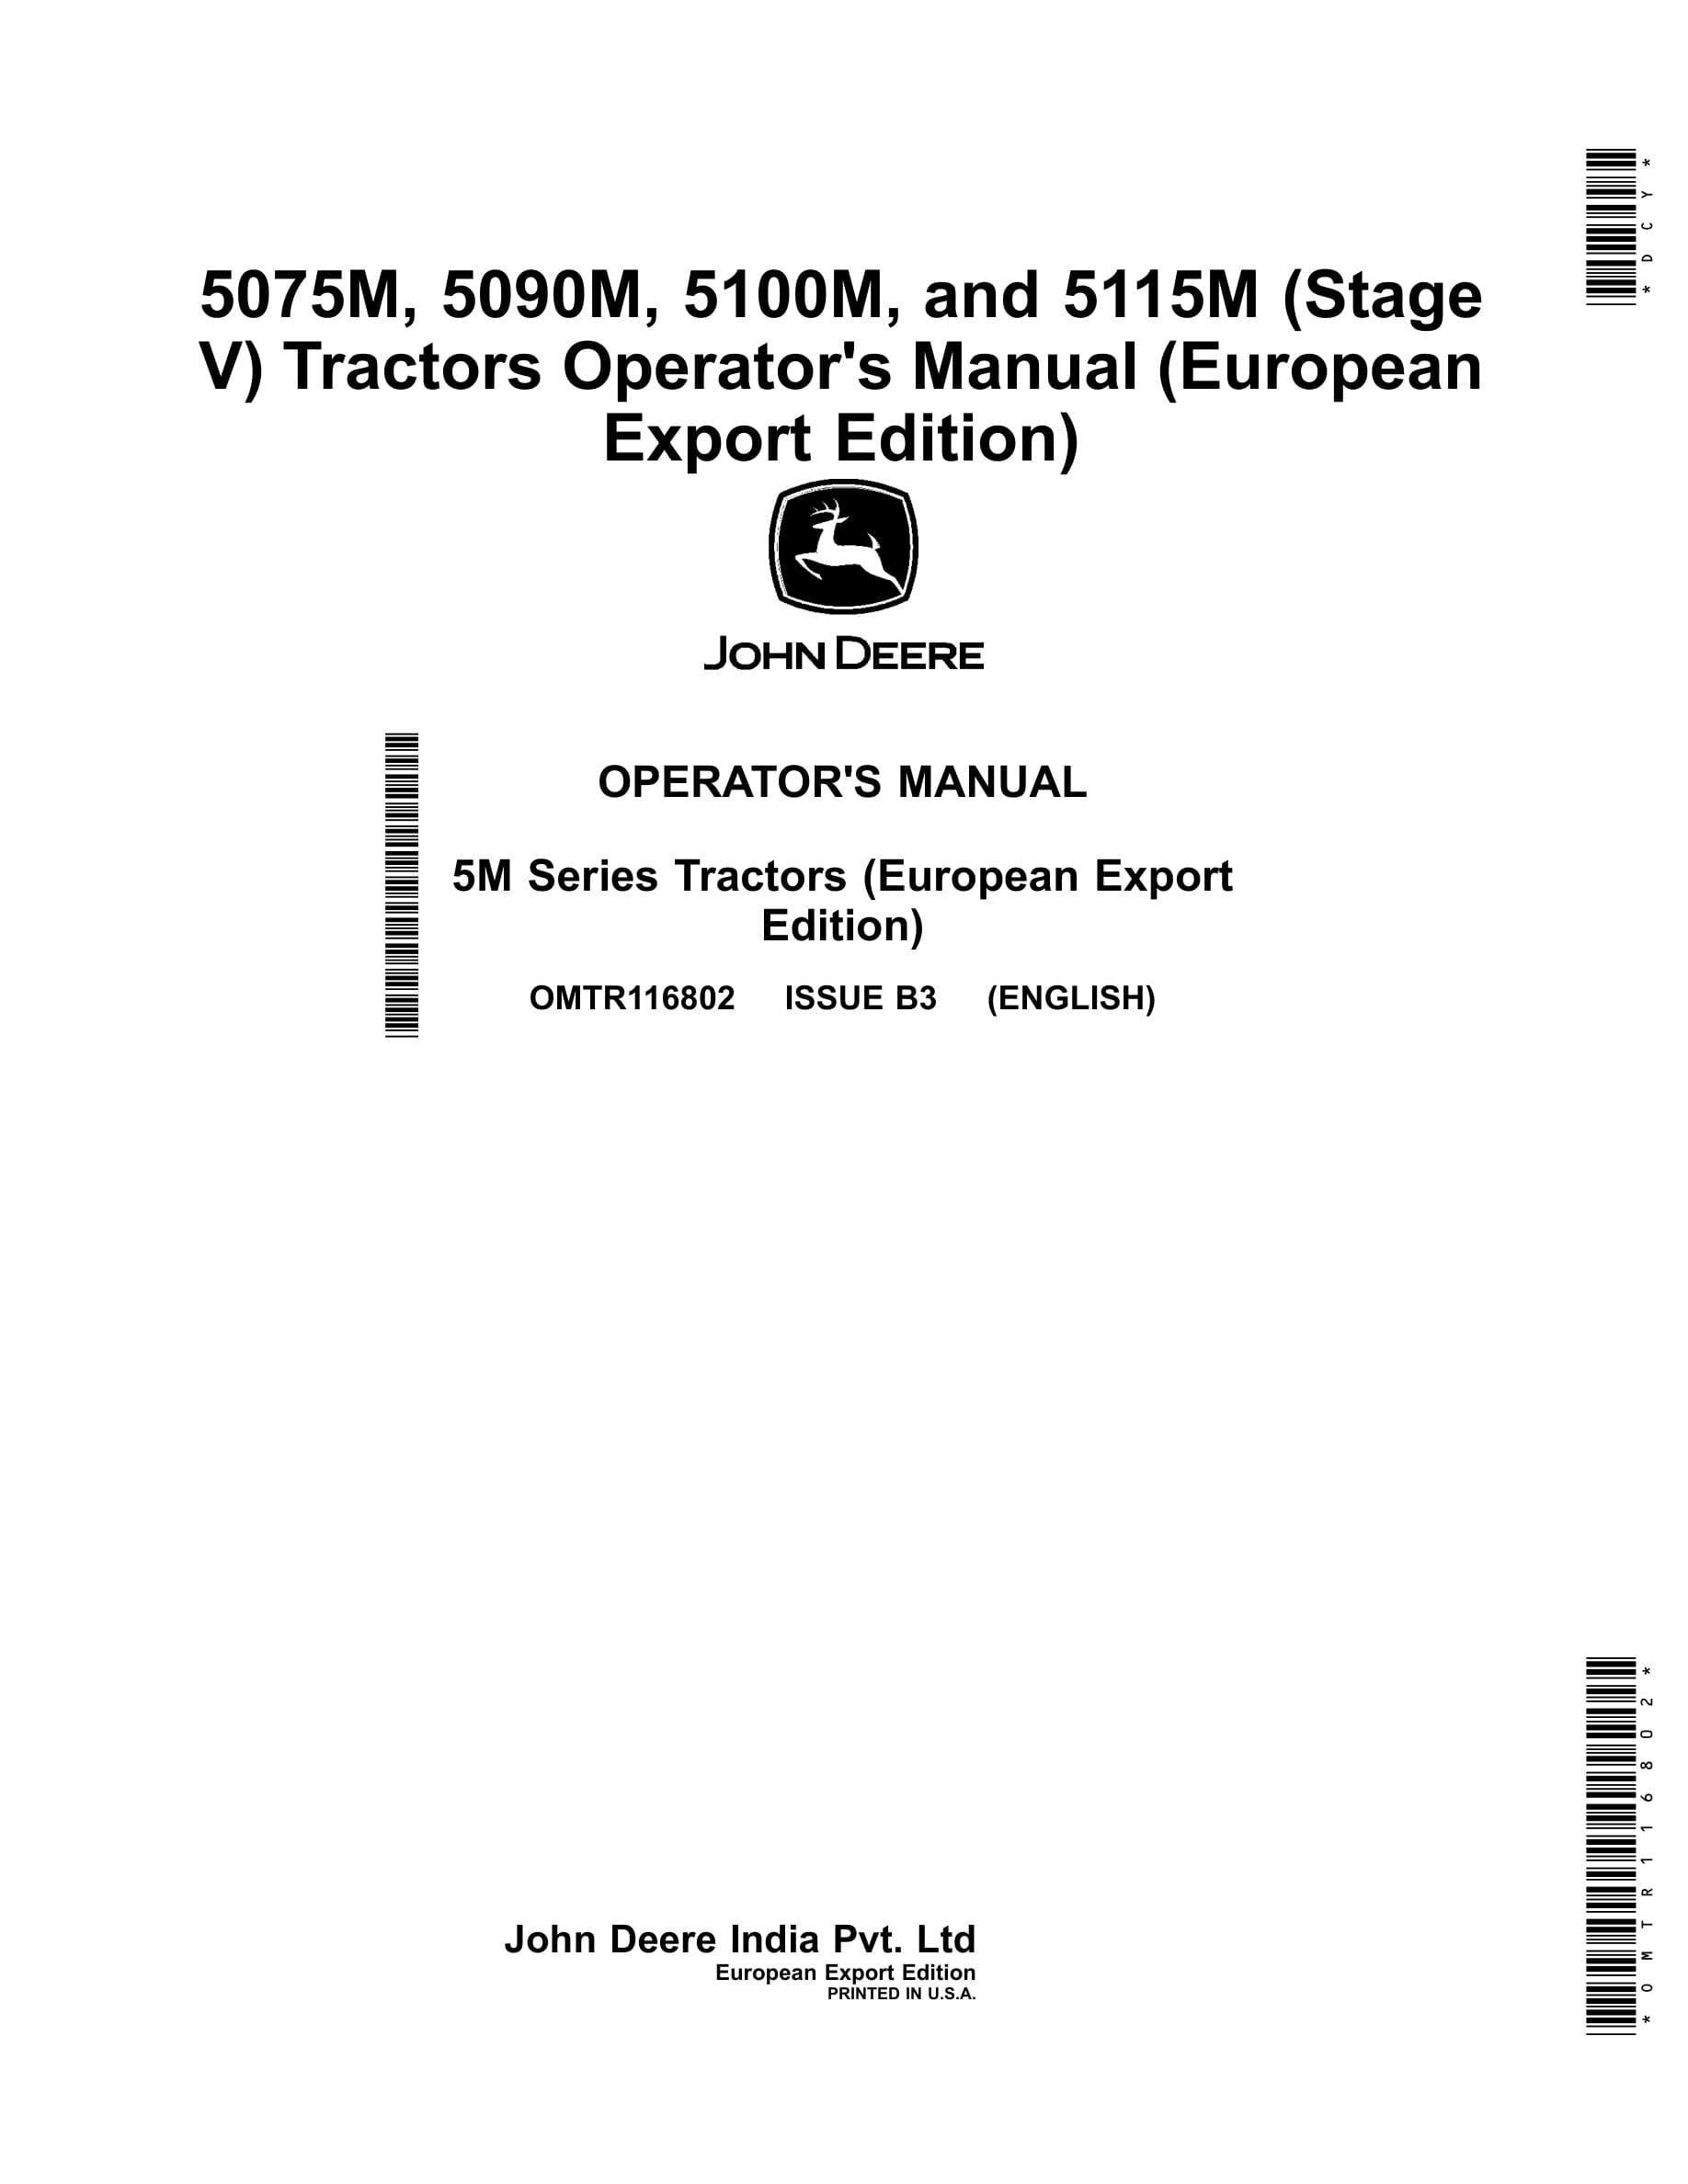 John Deere 5075m, 5090m, 5100m, And 5115m (stage V) Tractors Operator Manuals OMTR116802-1